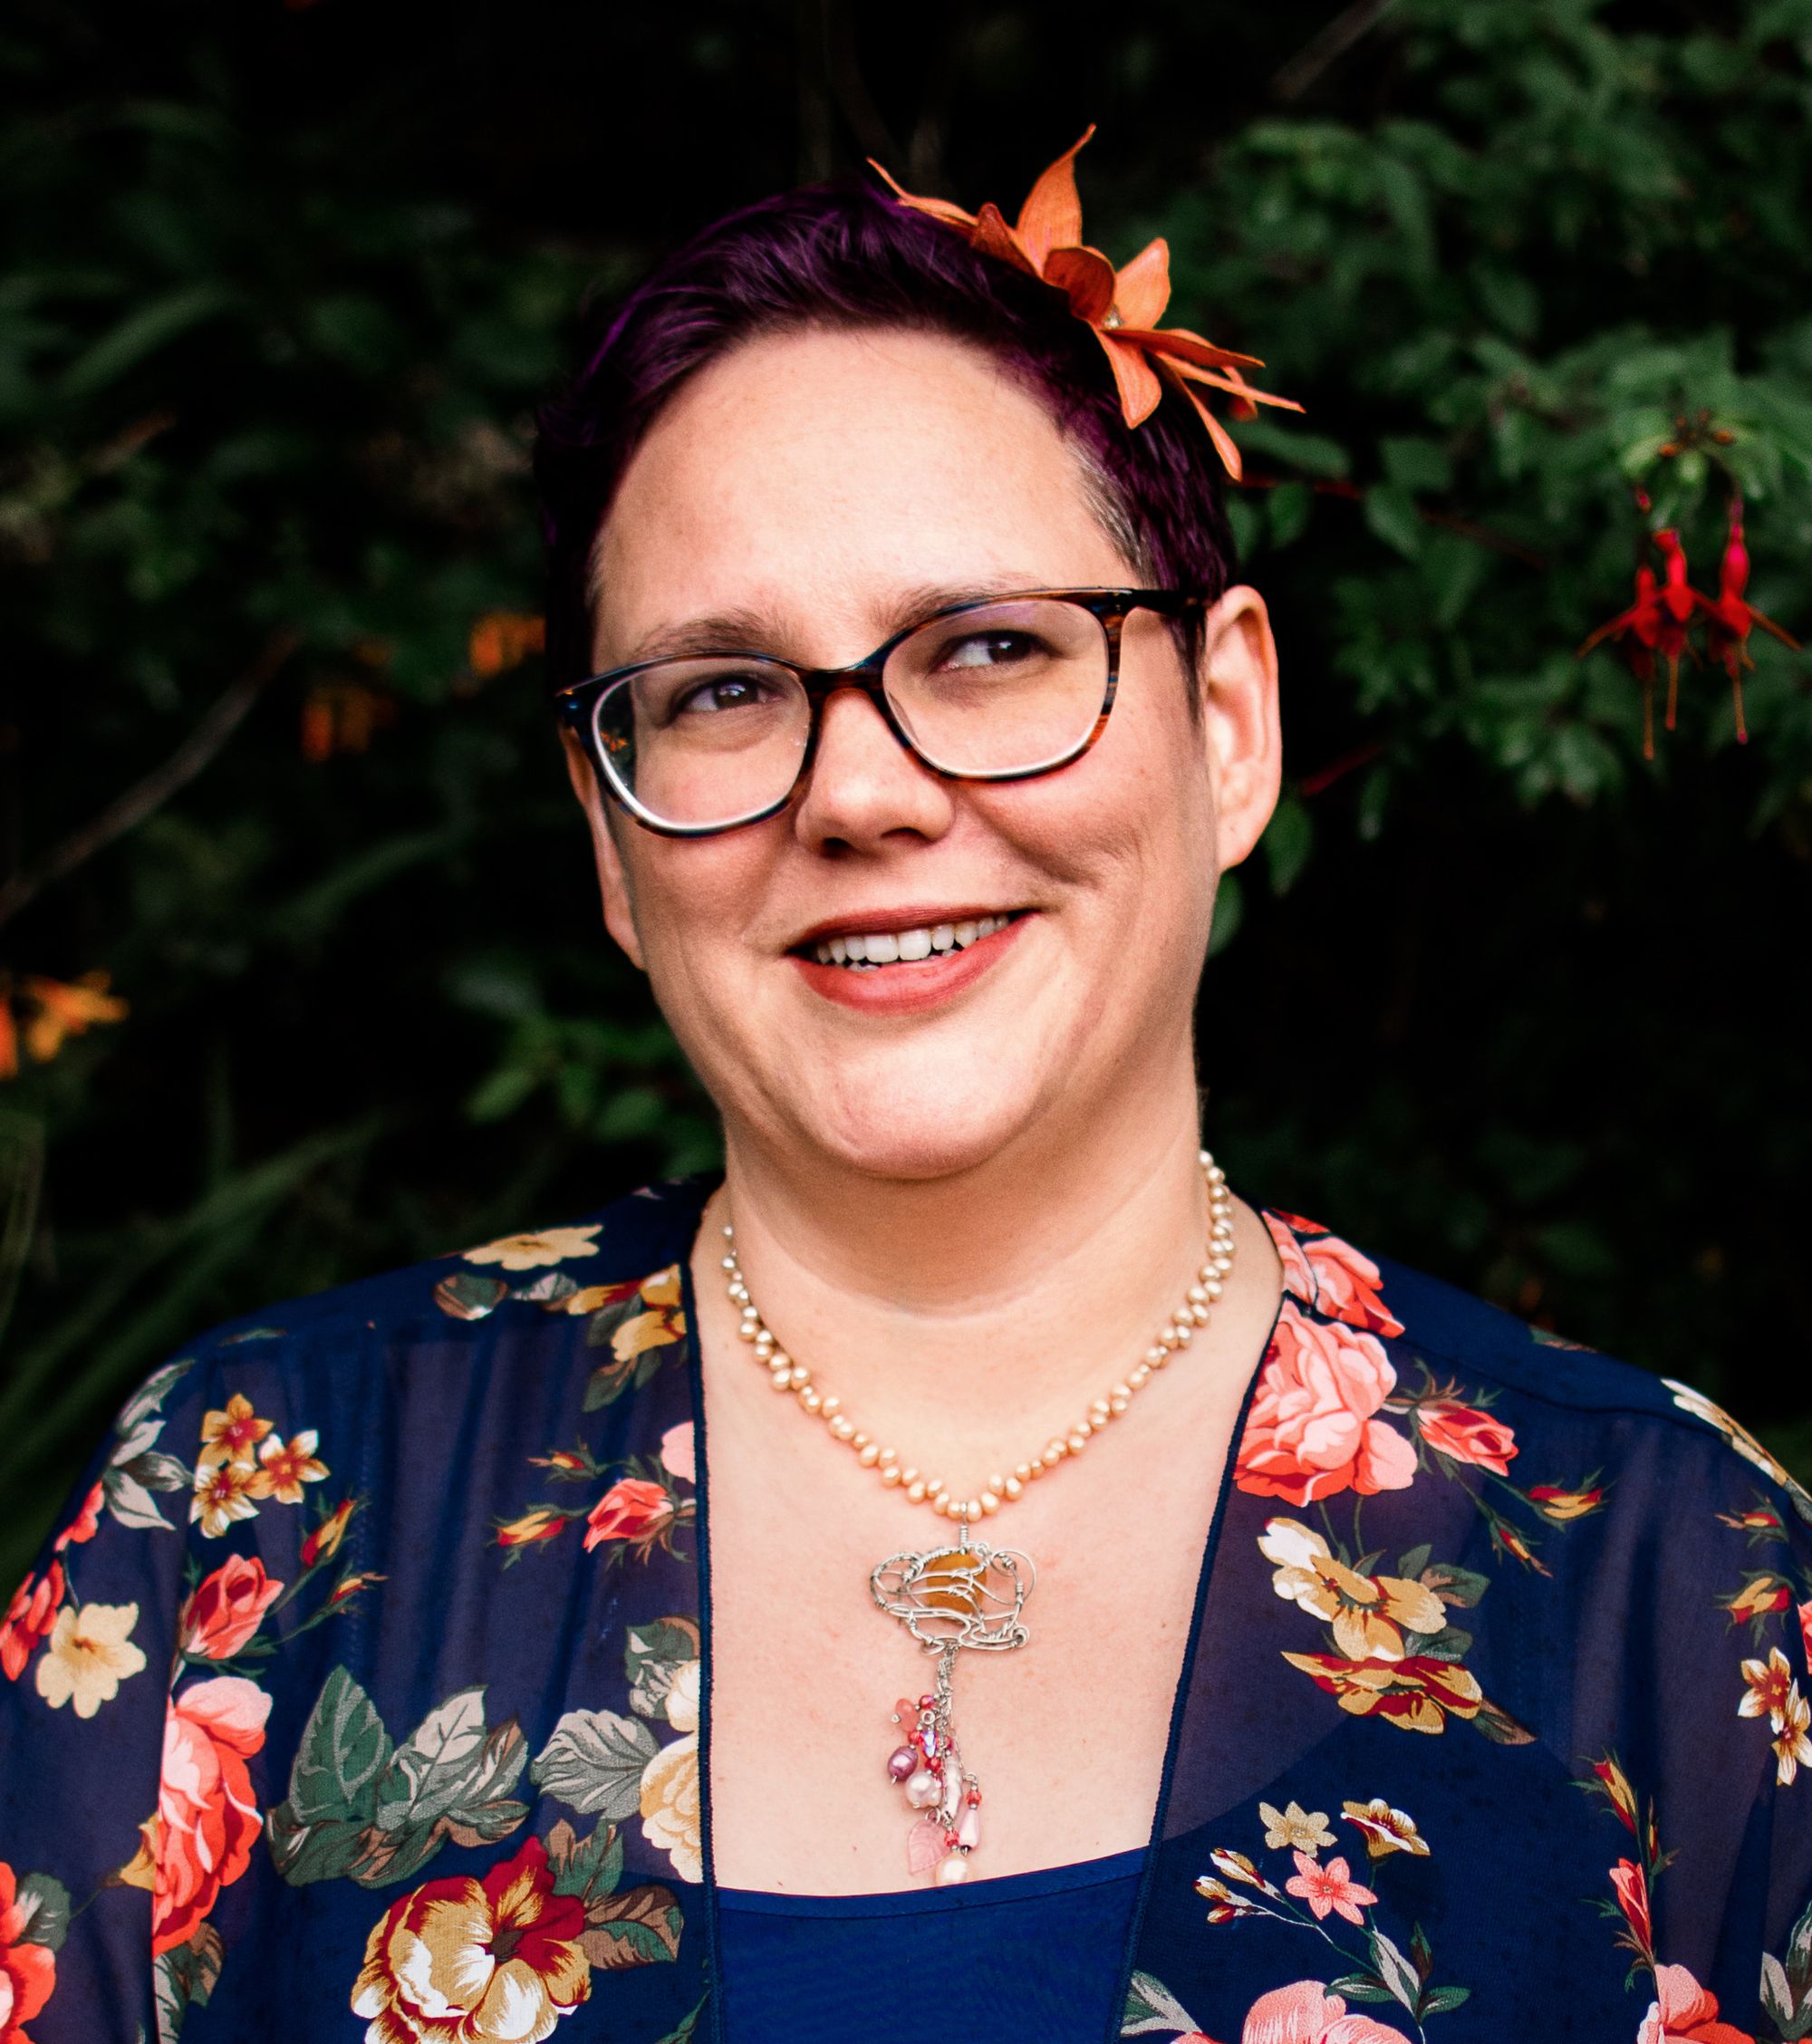 Me! A person with short purple hair and an orange hair flower (made by Betsie Withey), wearing a navy blue floral top and glancing upward as if they have a mischievous idea, perhaps? Photo by Marie O’Mahony Photography, August, 2019.